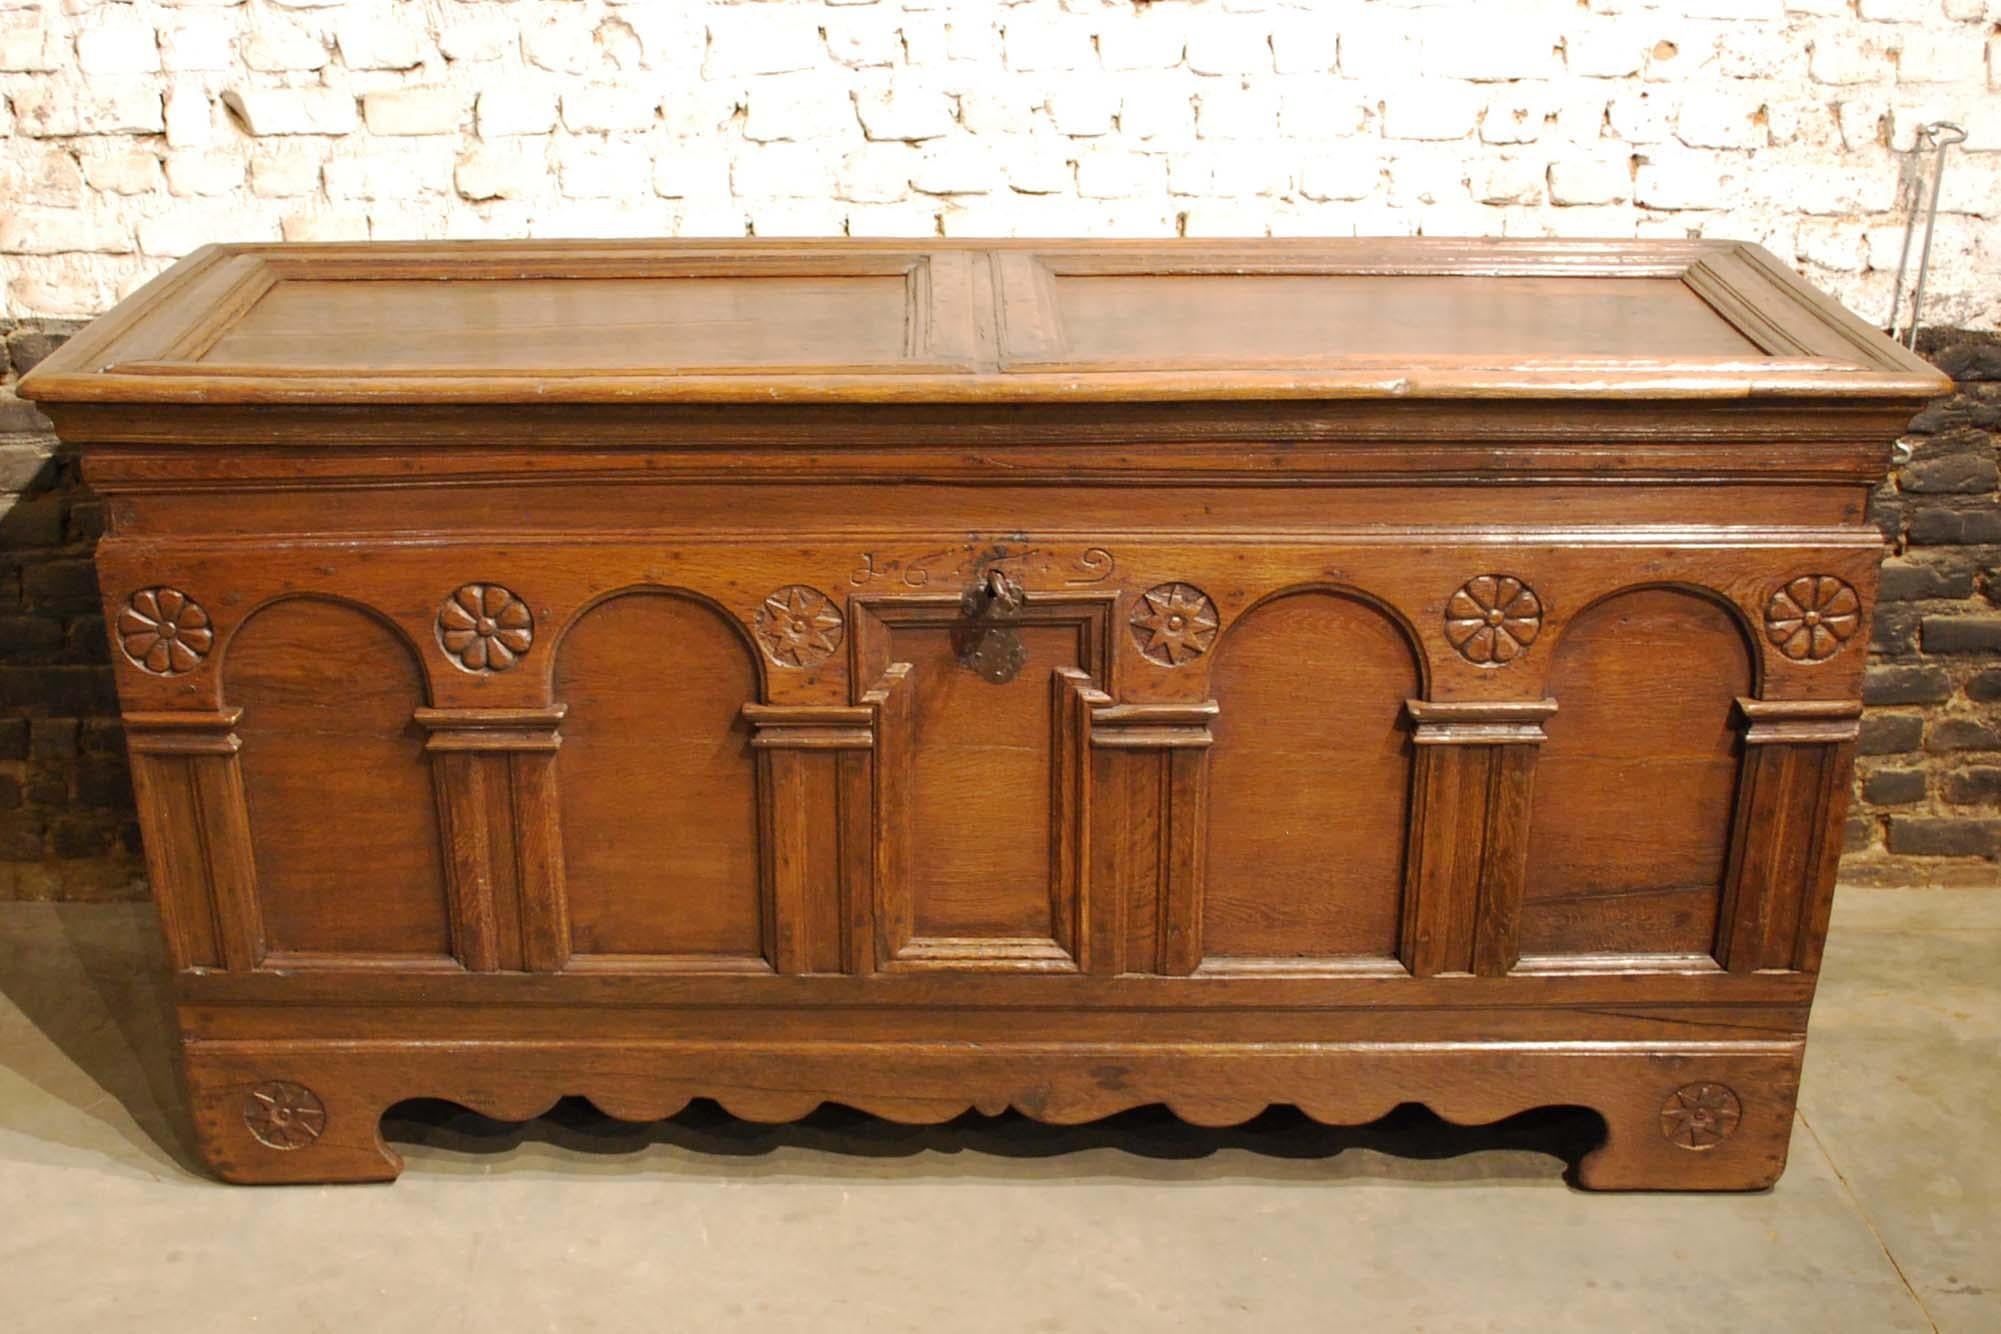 A beautiful warm brown Renaissance chest or coffer that was made in 1669 in the Netherlands as it is dated of the front. 
The front has hand carved geometric ornaments and arched panels typical for the Renaissance style. The chest has its original